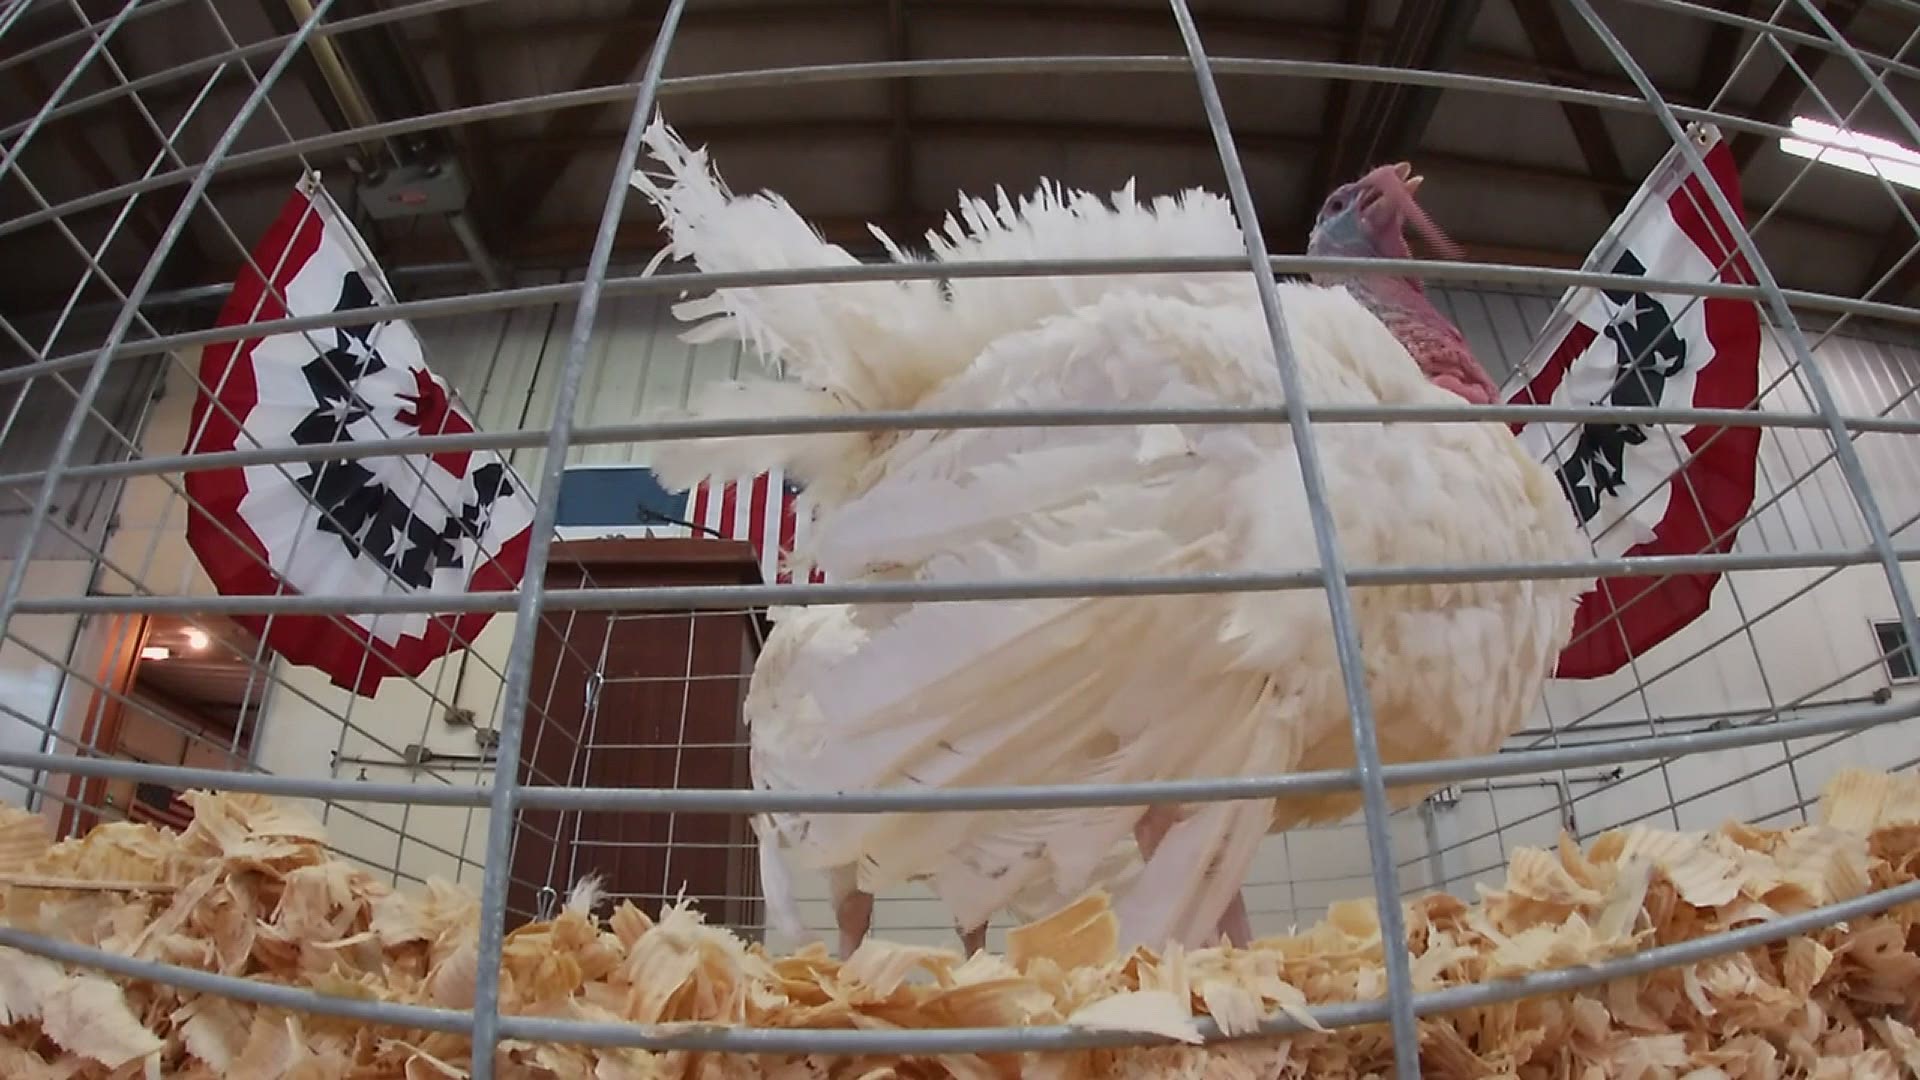 A sixth-generation farmer from Walcott raised the turkeys that will be pardoned ahead of Thanksgiving.